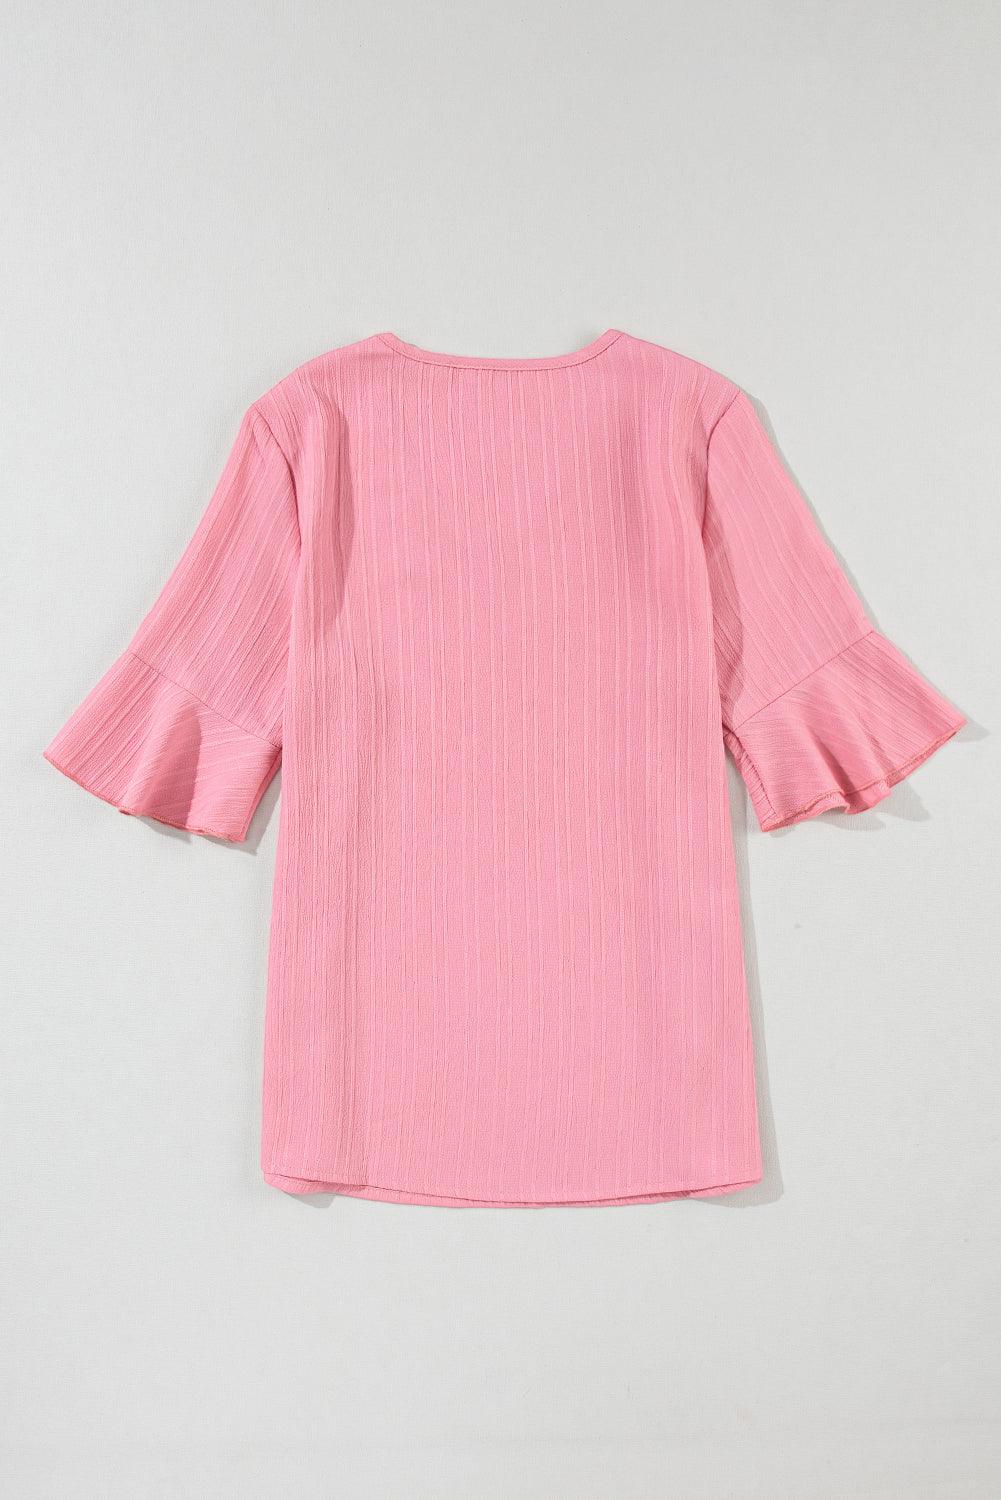 Peach Blossom Ruffled Half Sleeve V Neck Textured Top for Ladies